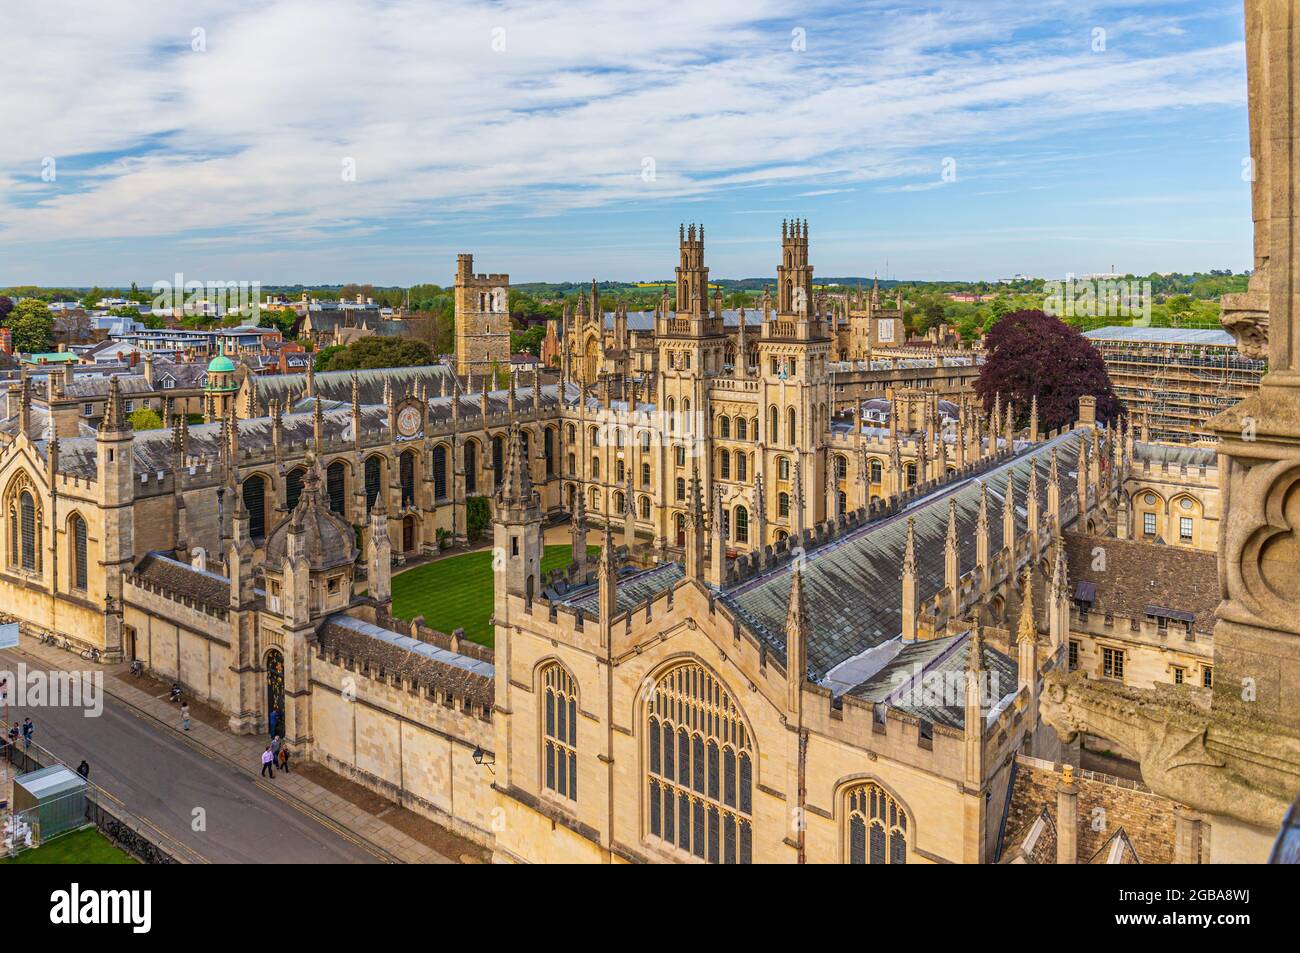 All Souls College at the university of Oxford. Oxford, England Stock Photo